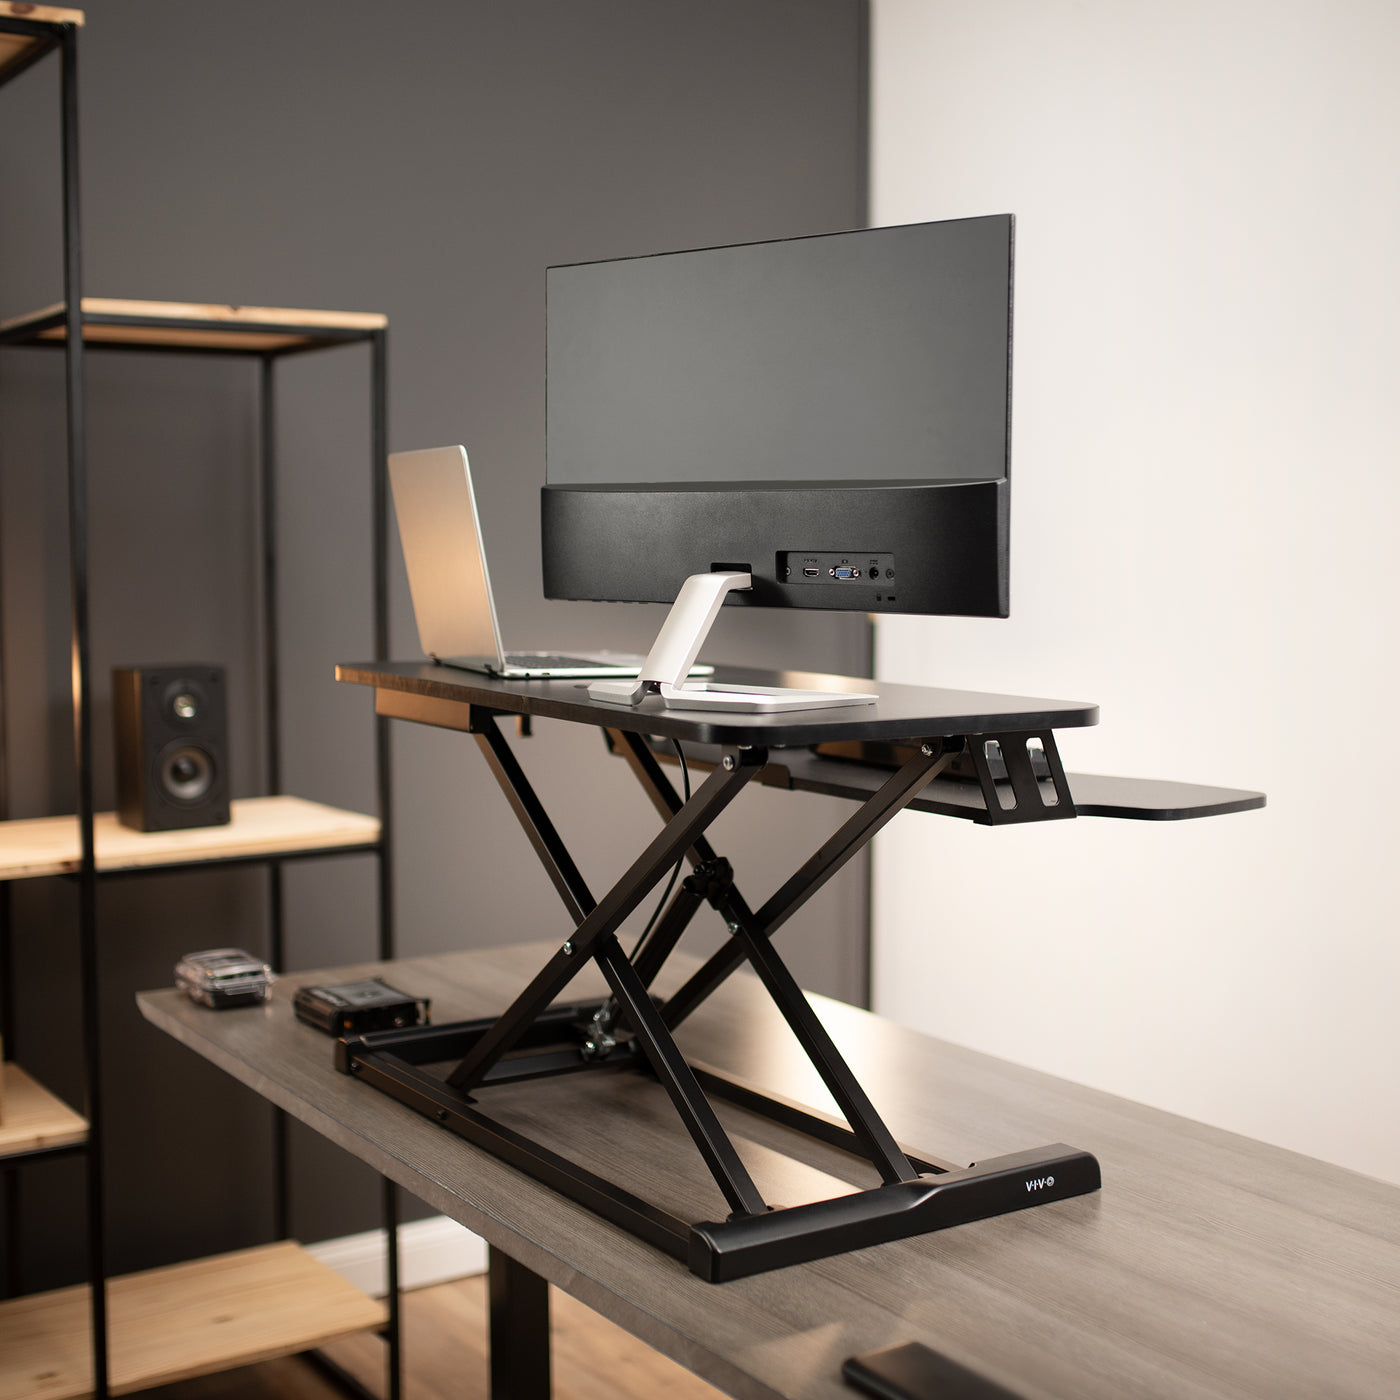 Back view of X-frame support structure of desk riser in modern office workspace elevating equipment.